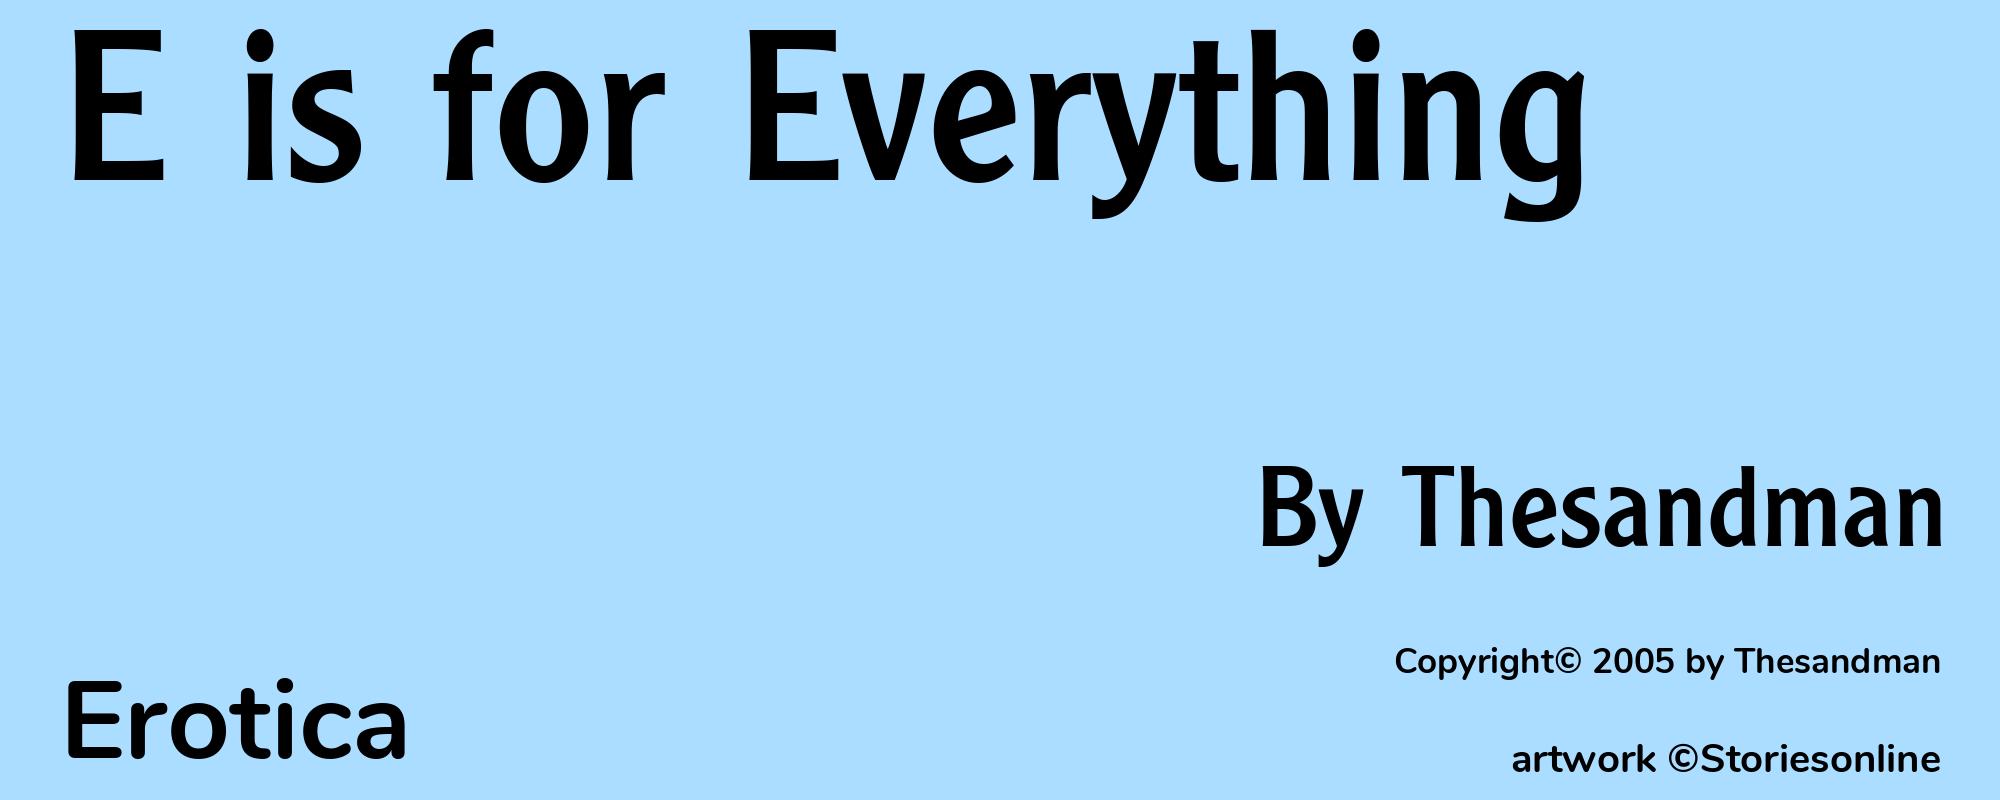 E is for Everything - Cover